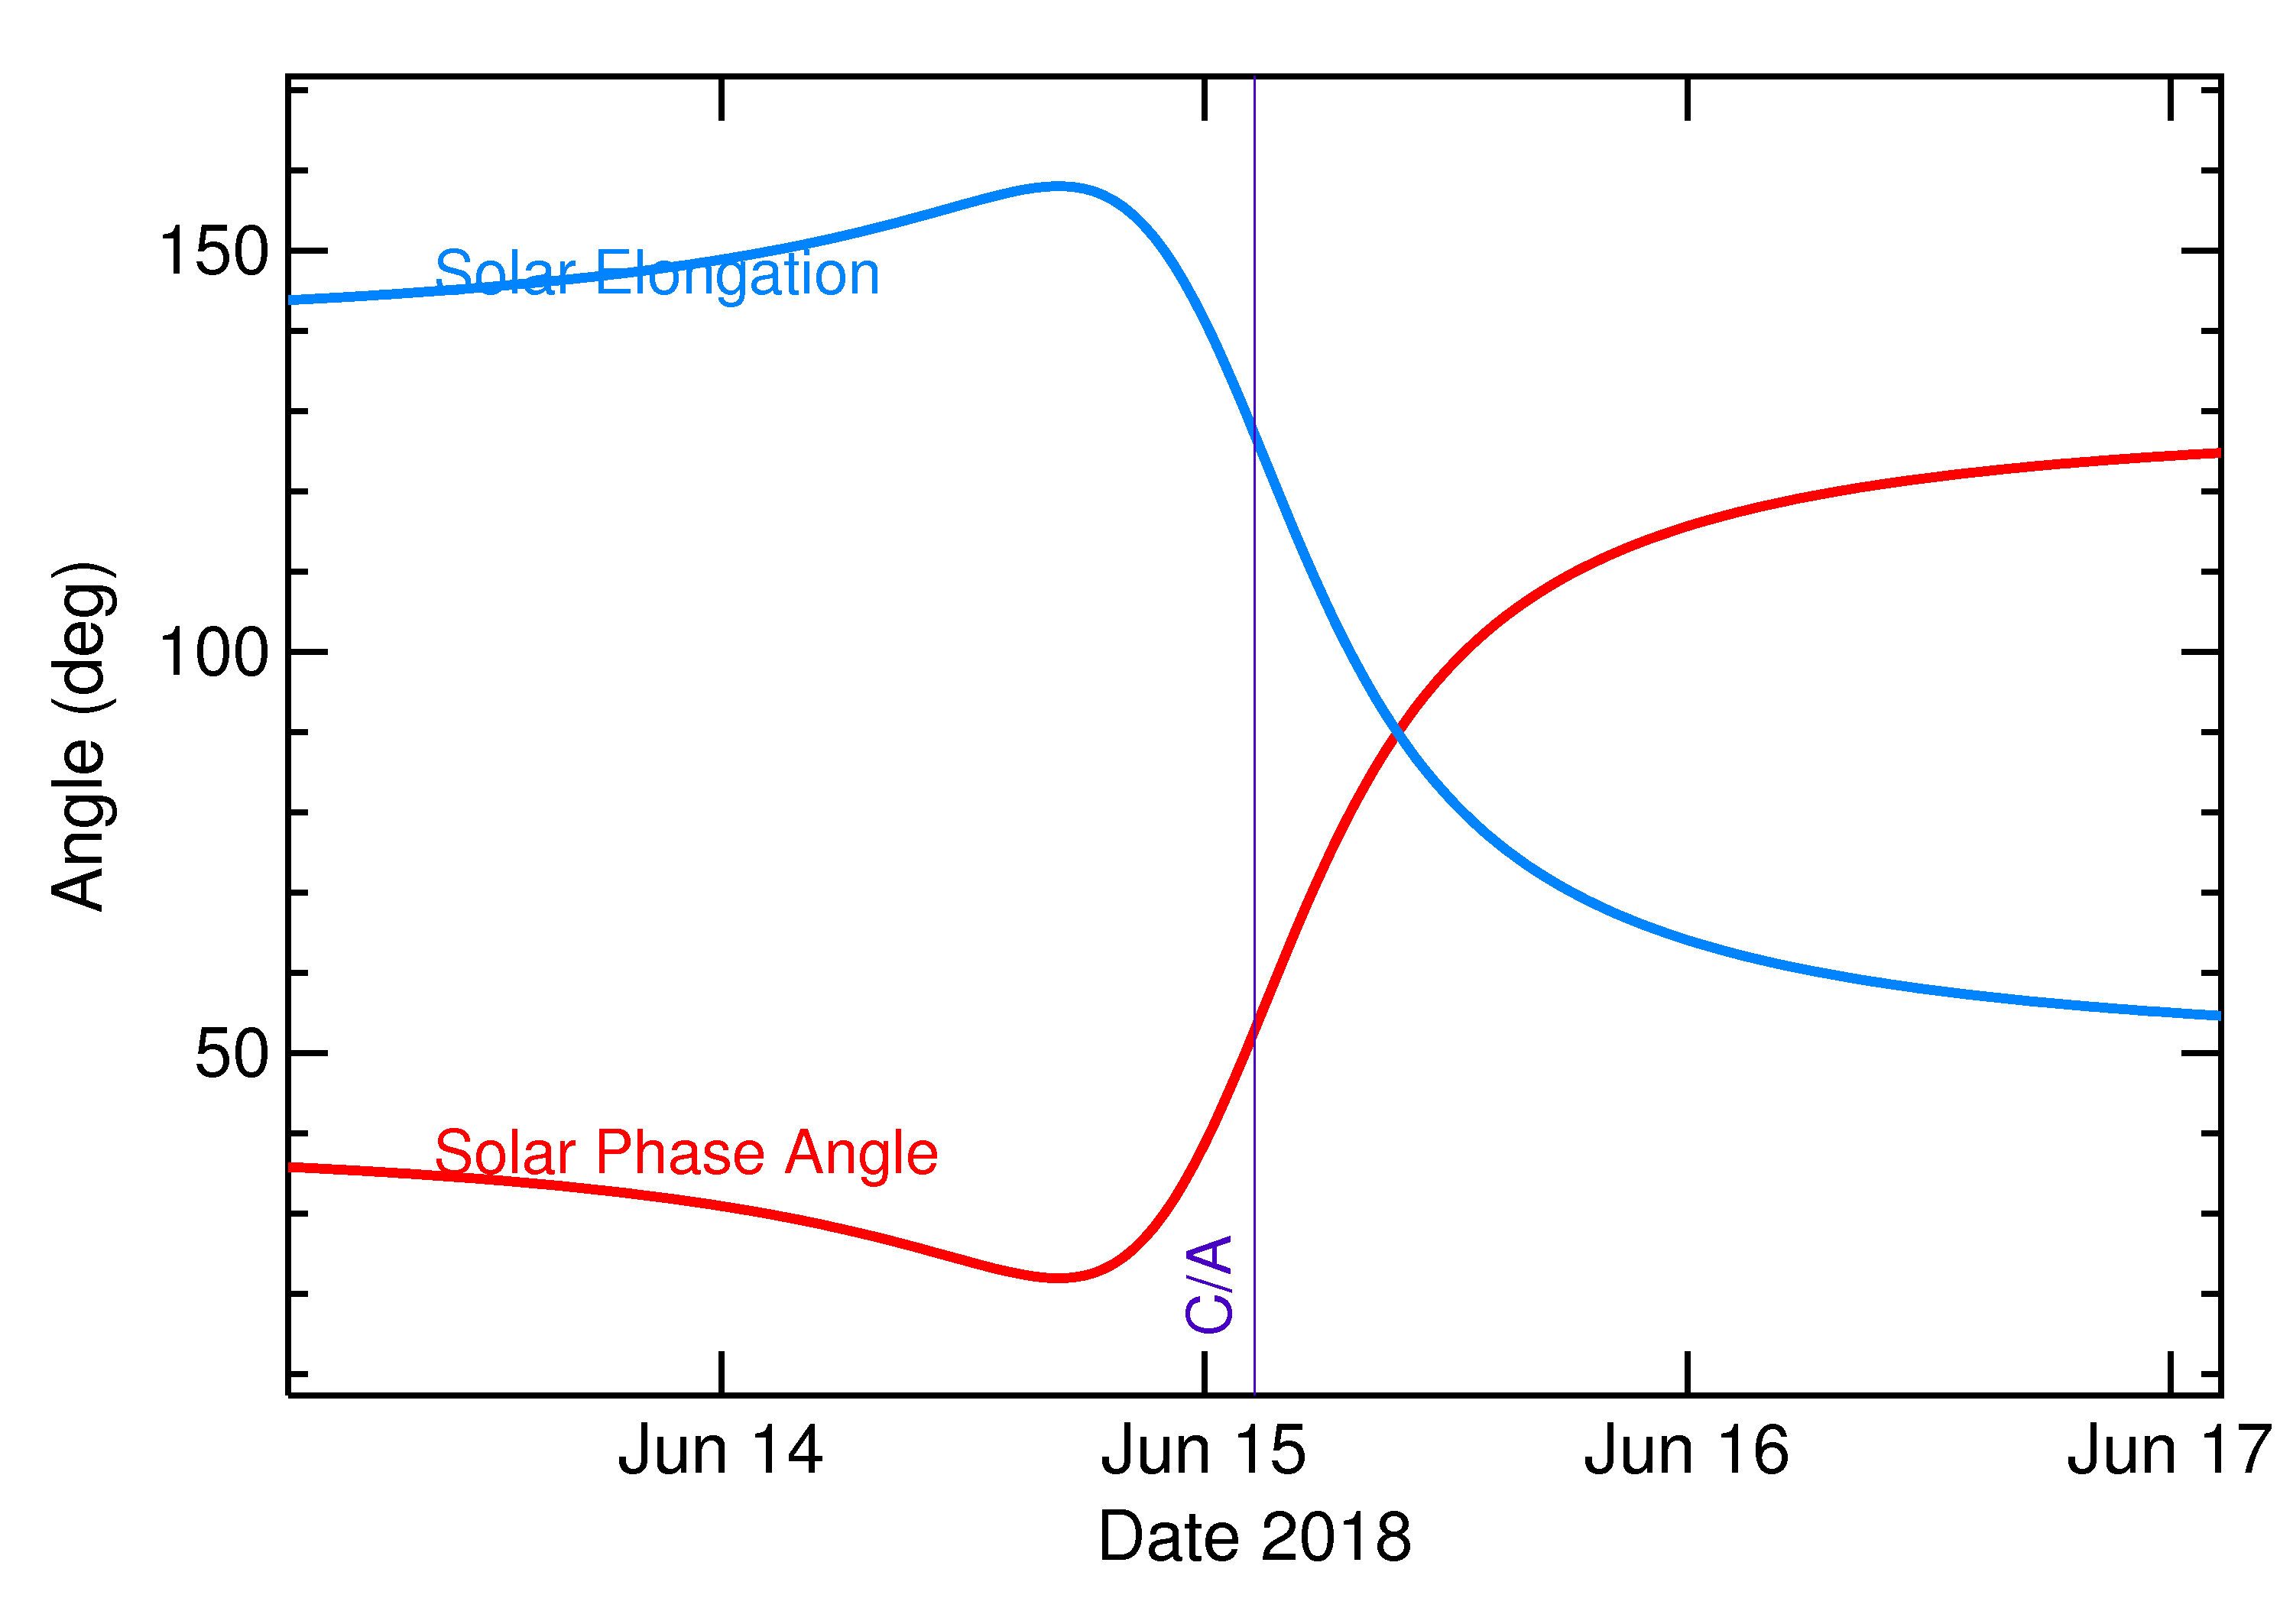 Solar Elongation and Solar Phase Angle of 2018 LV3 in the days around closest approach